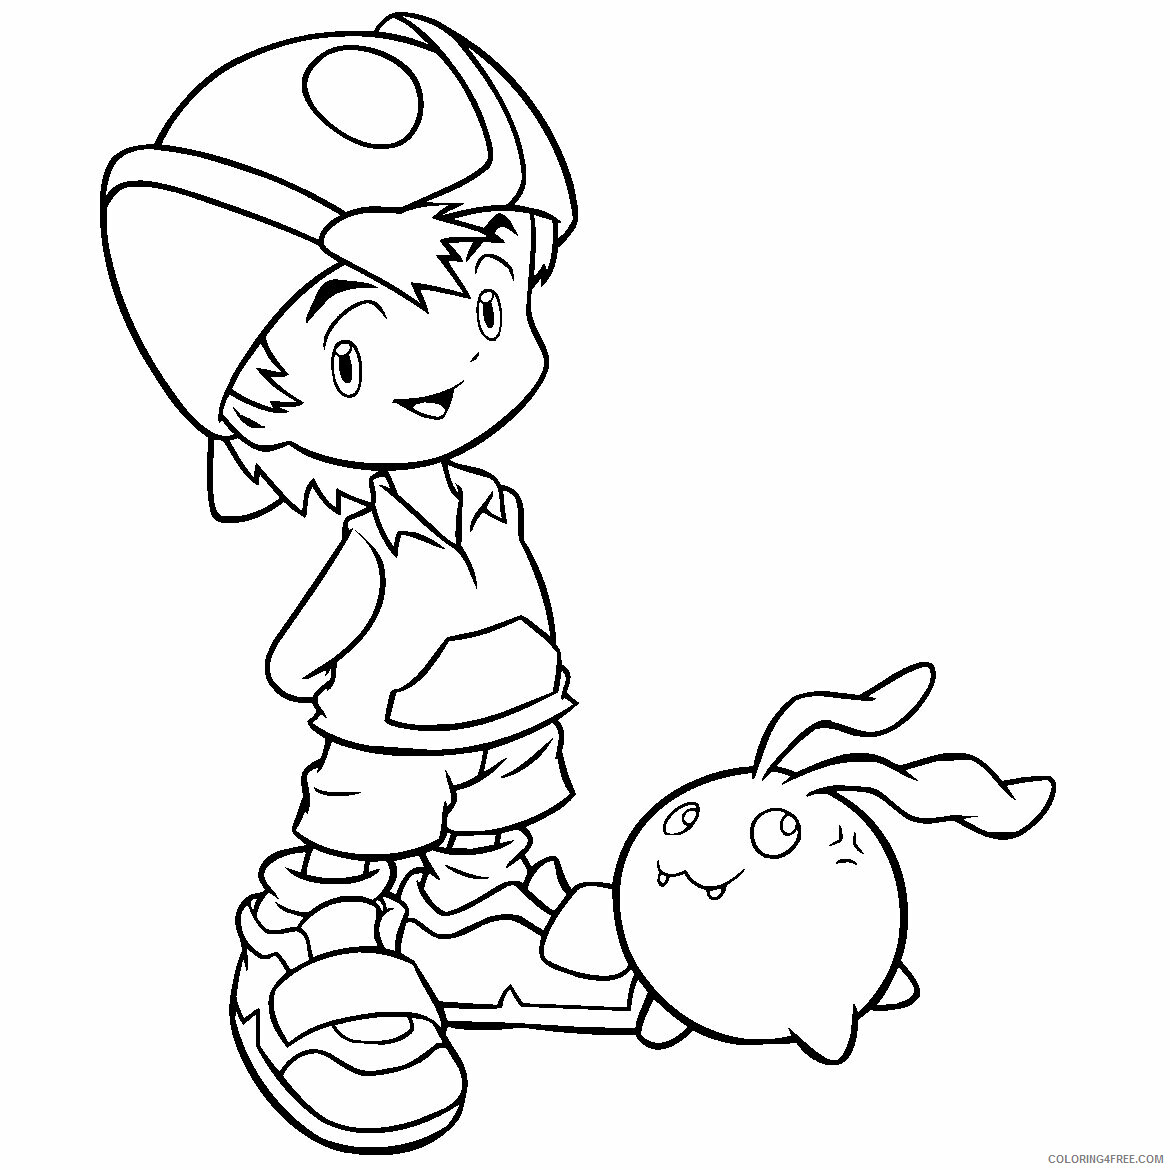 Digimon Printable Coloring Pages Anime digimon 3 2021 0351 Coloring4free